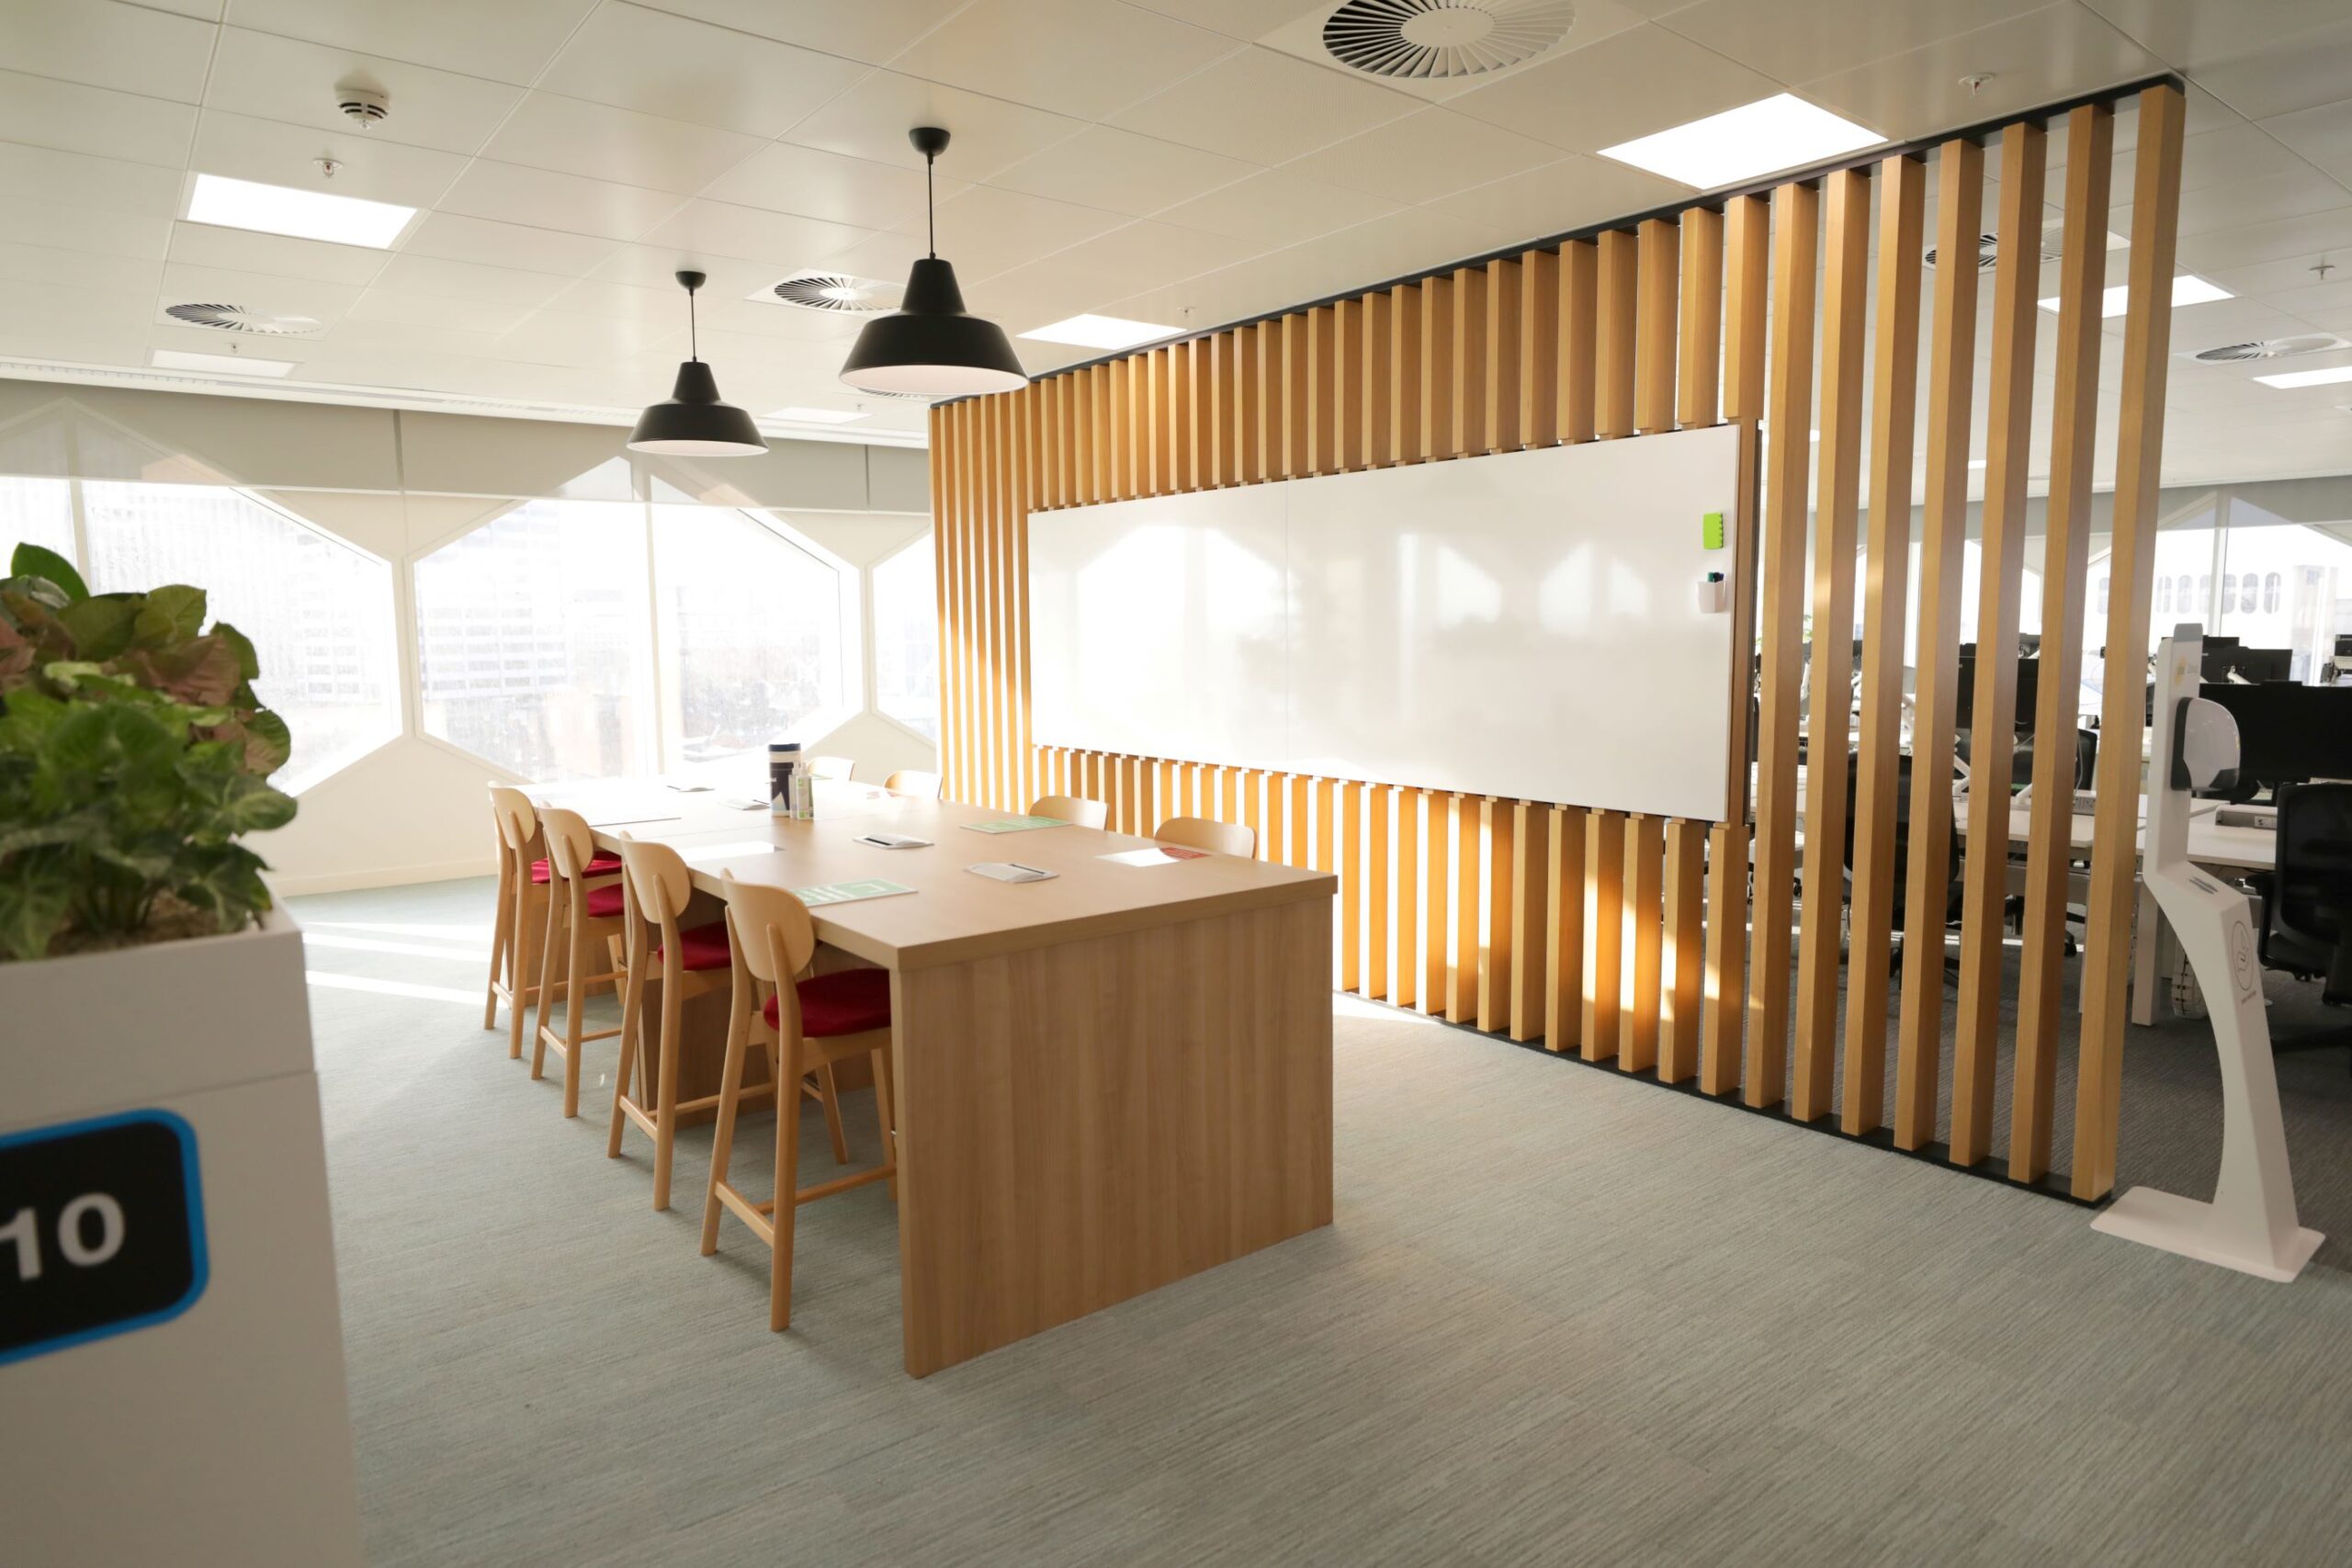 Decorative Image: Image of Meeting Table and white board inside DWP's Birmingham Hub